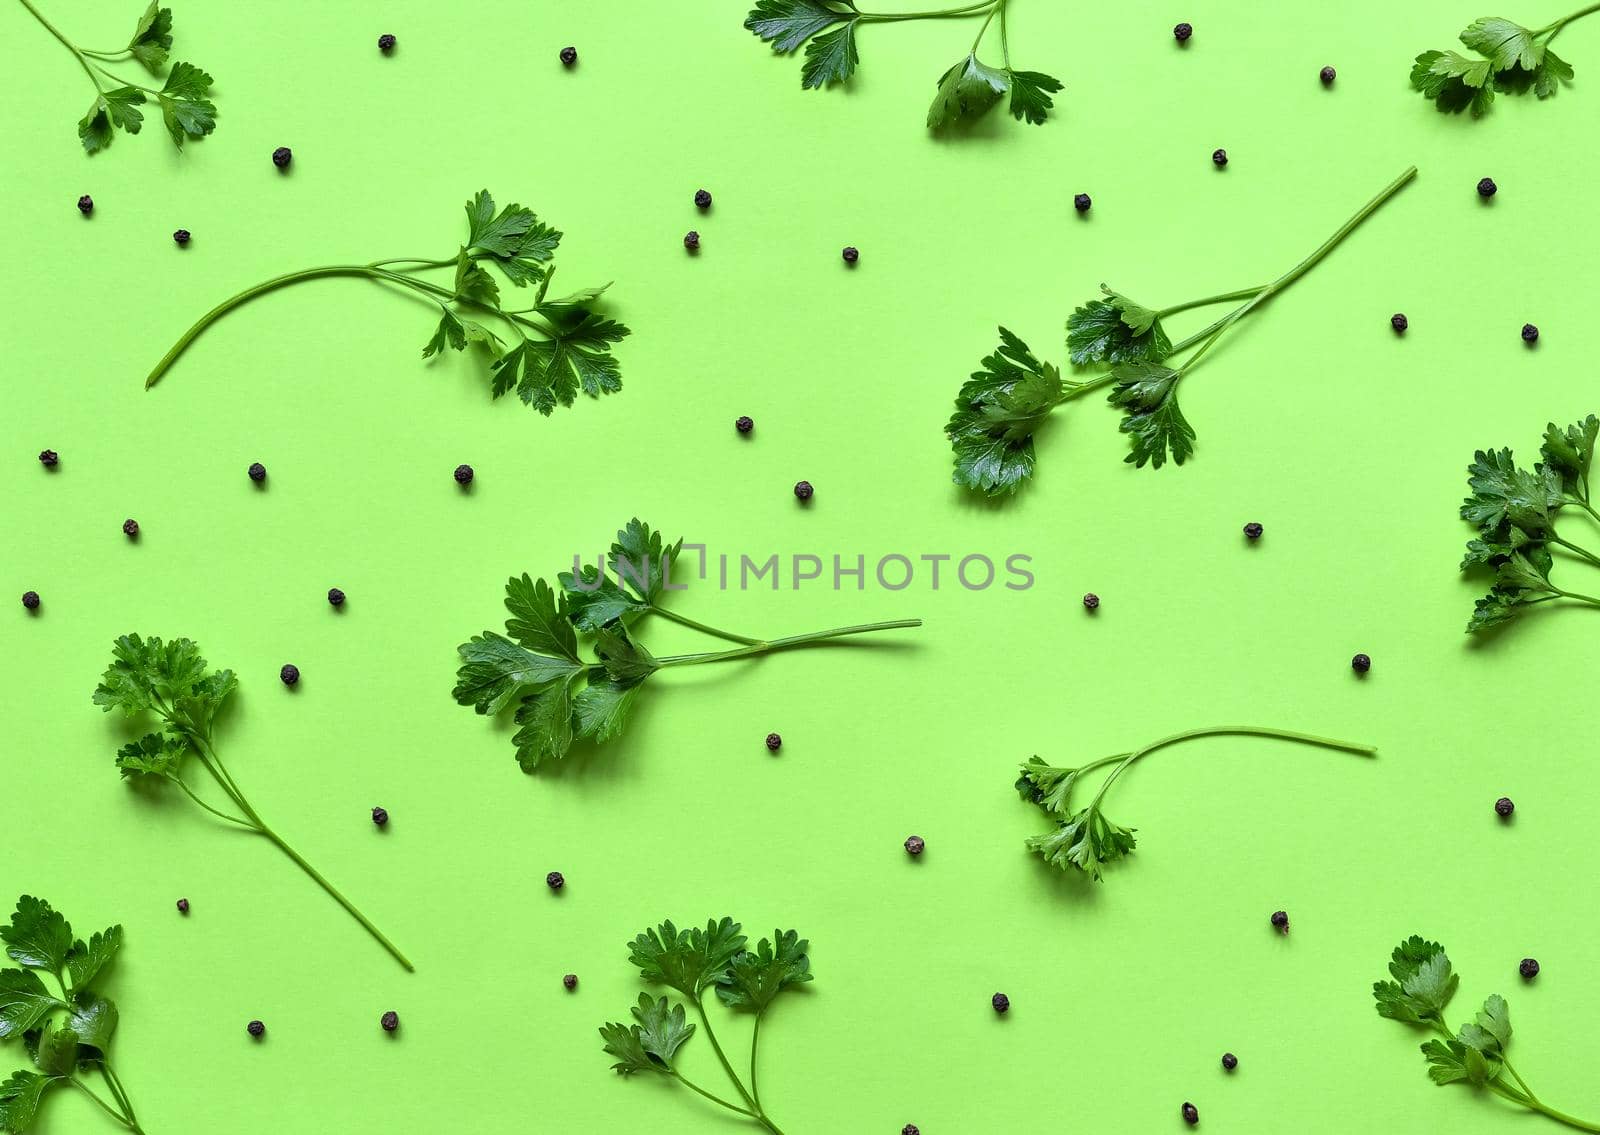 Parsley isolated. Pattern of parsley and black Pepper on a green background. Juicy bright green parsley leaves. Herbs and spices, flat lay, top view.